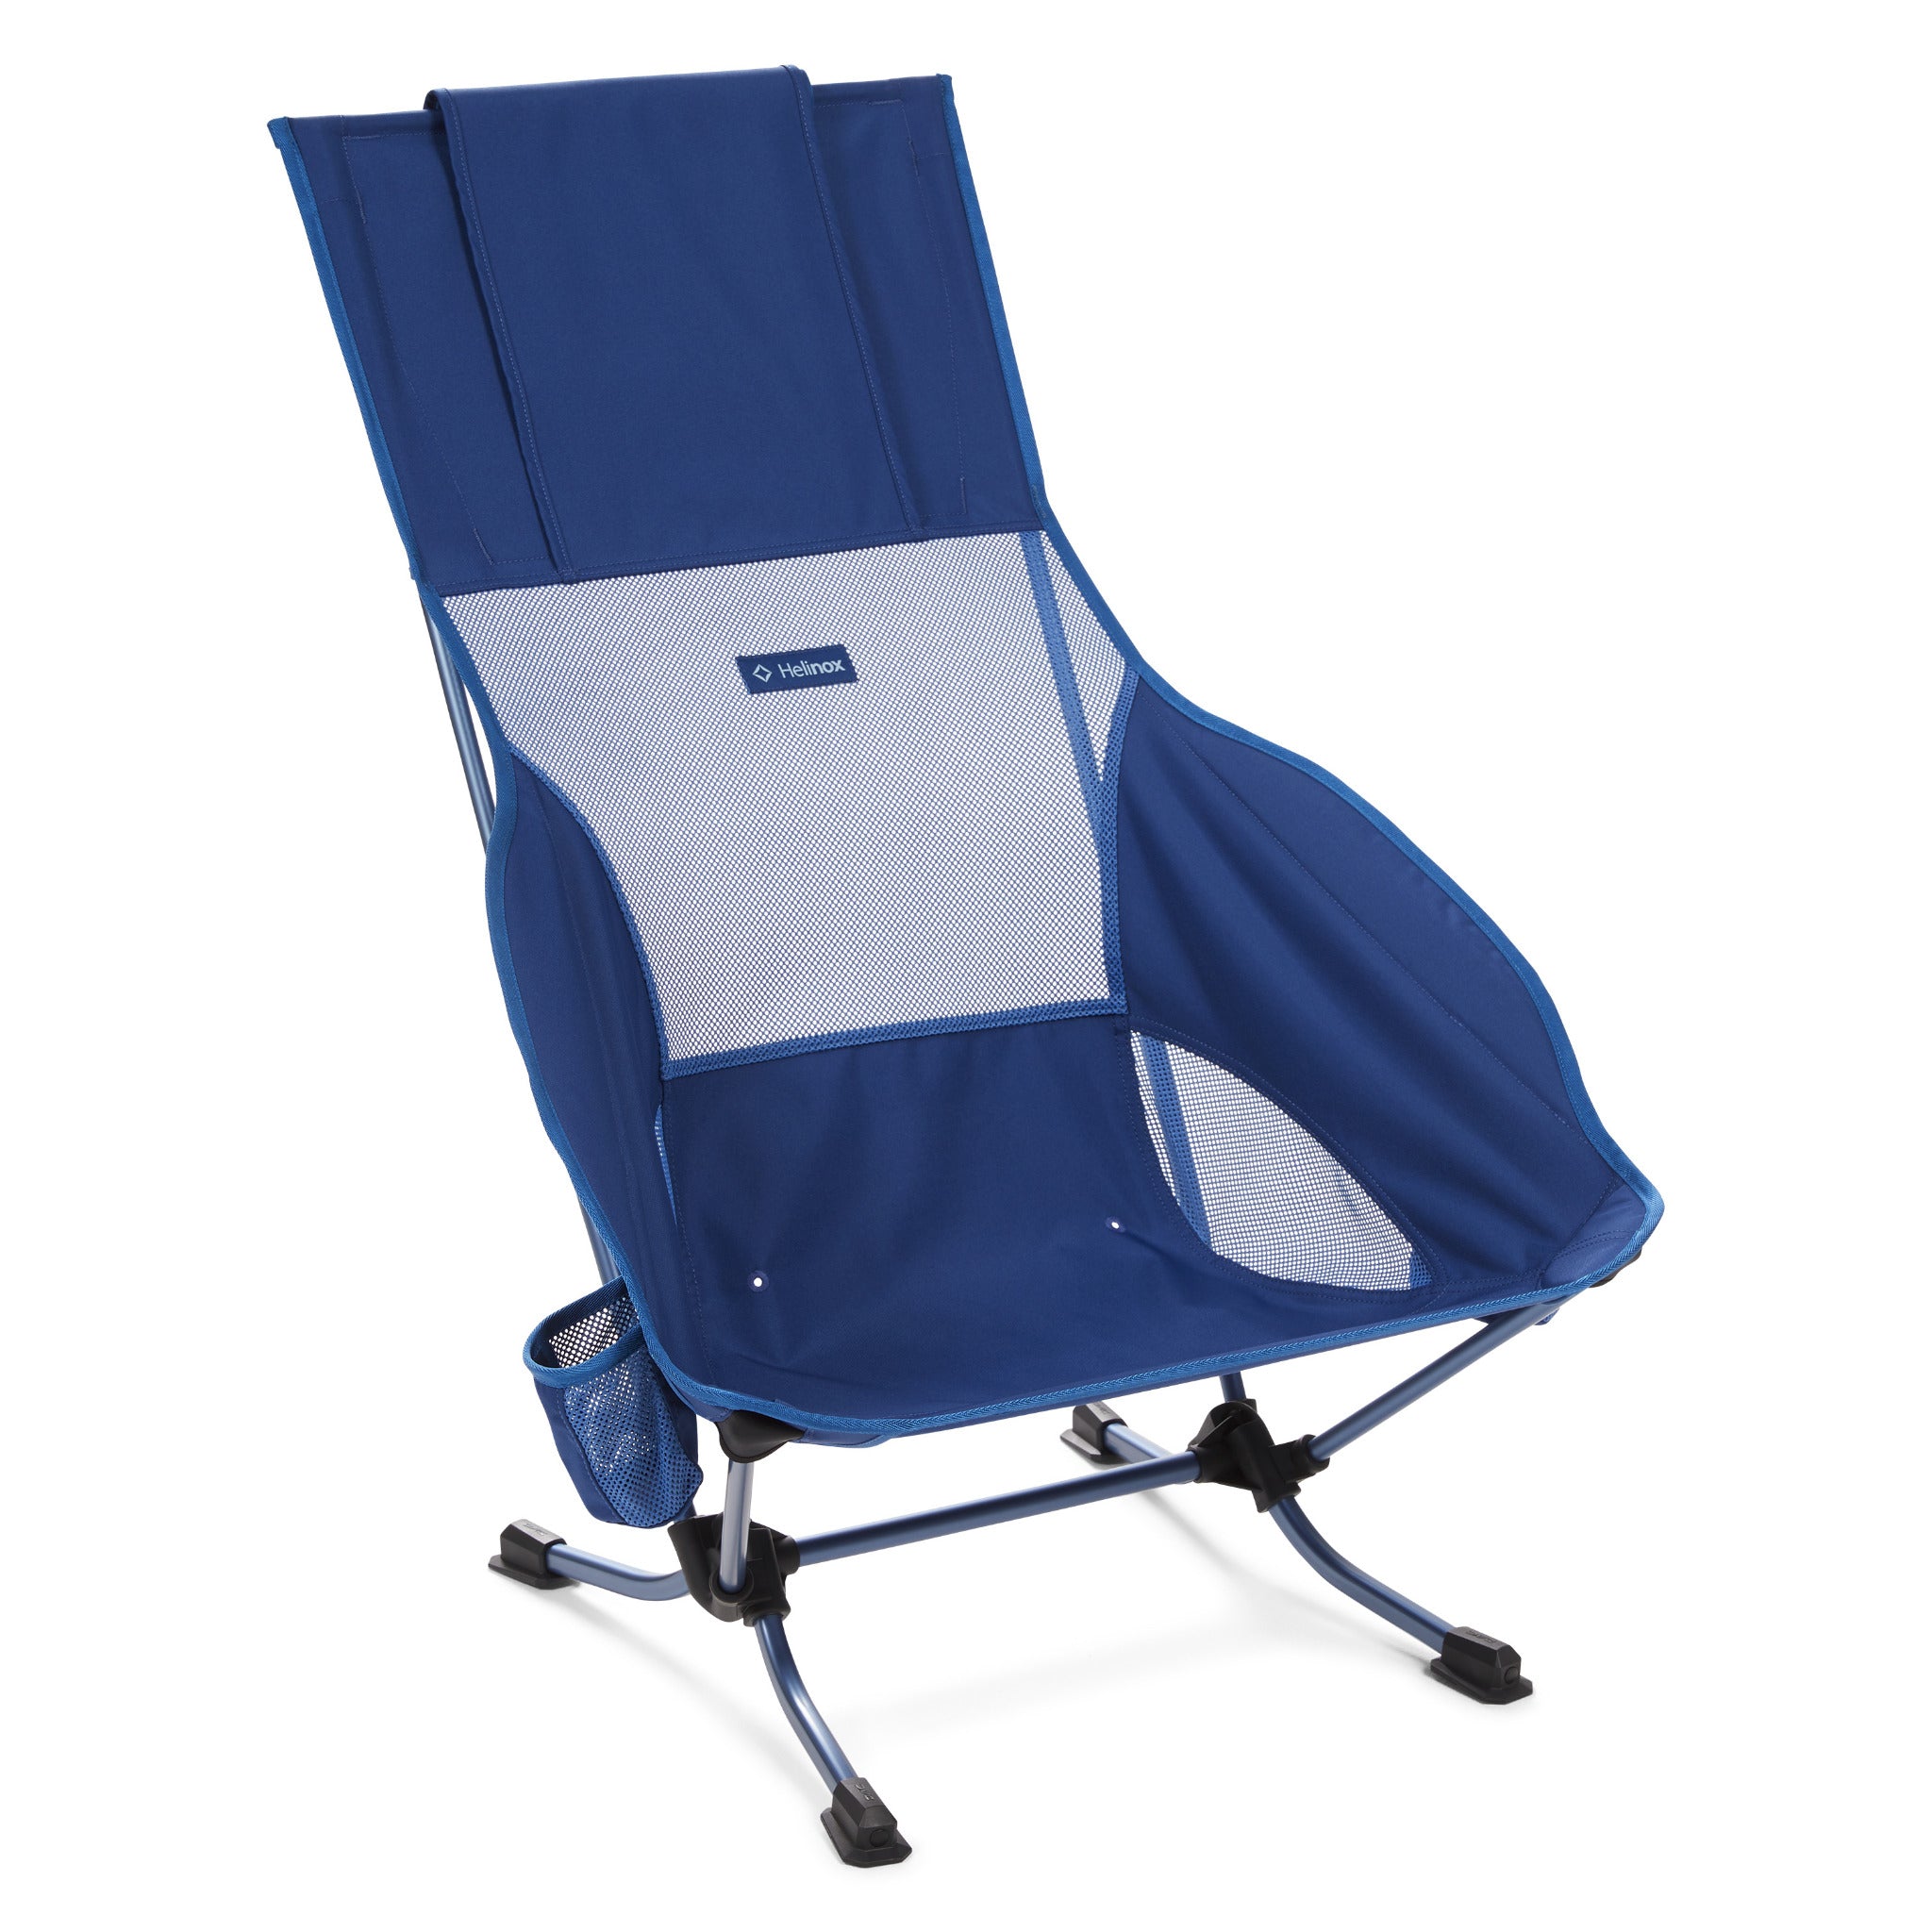 Creatice Helinox Beach Chair Sale for Small Space